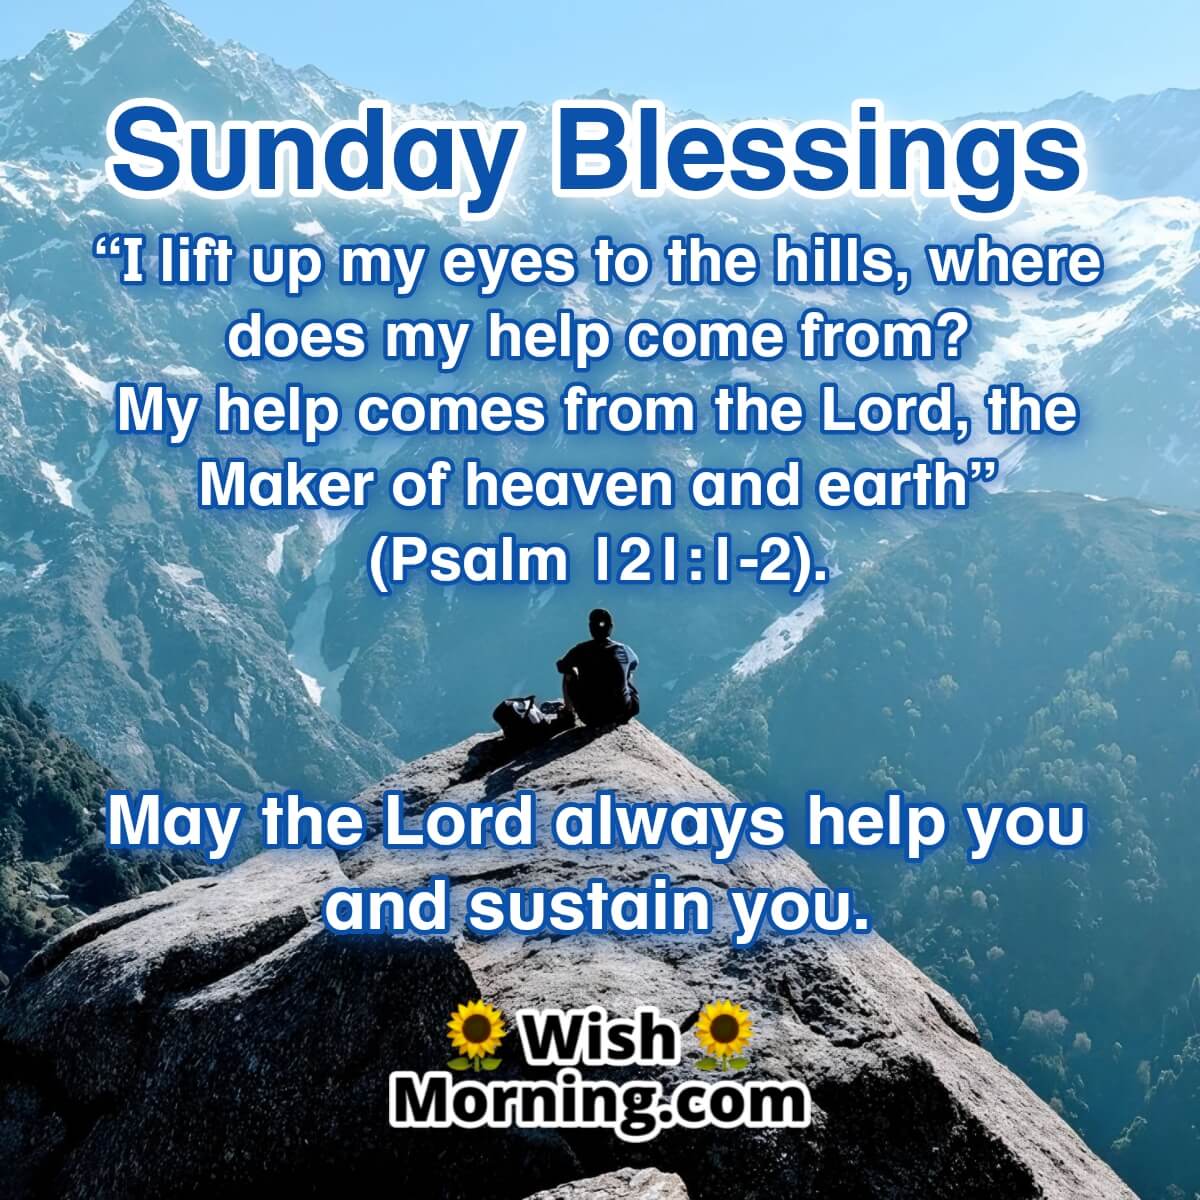 Sunday Blessings Bible Verses